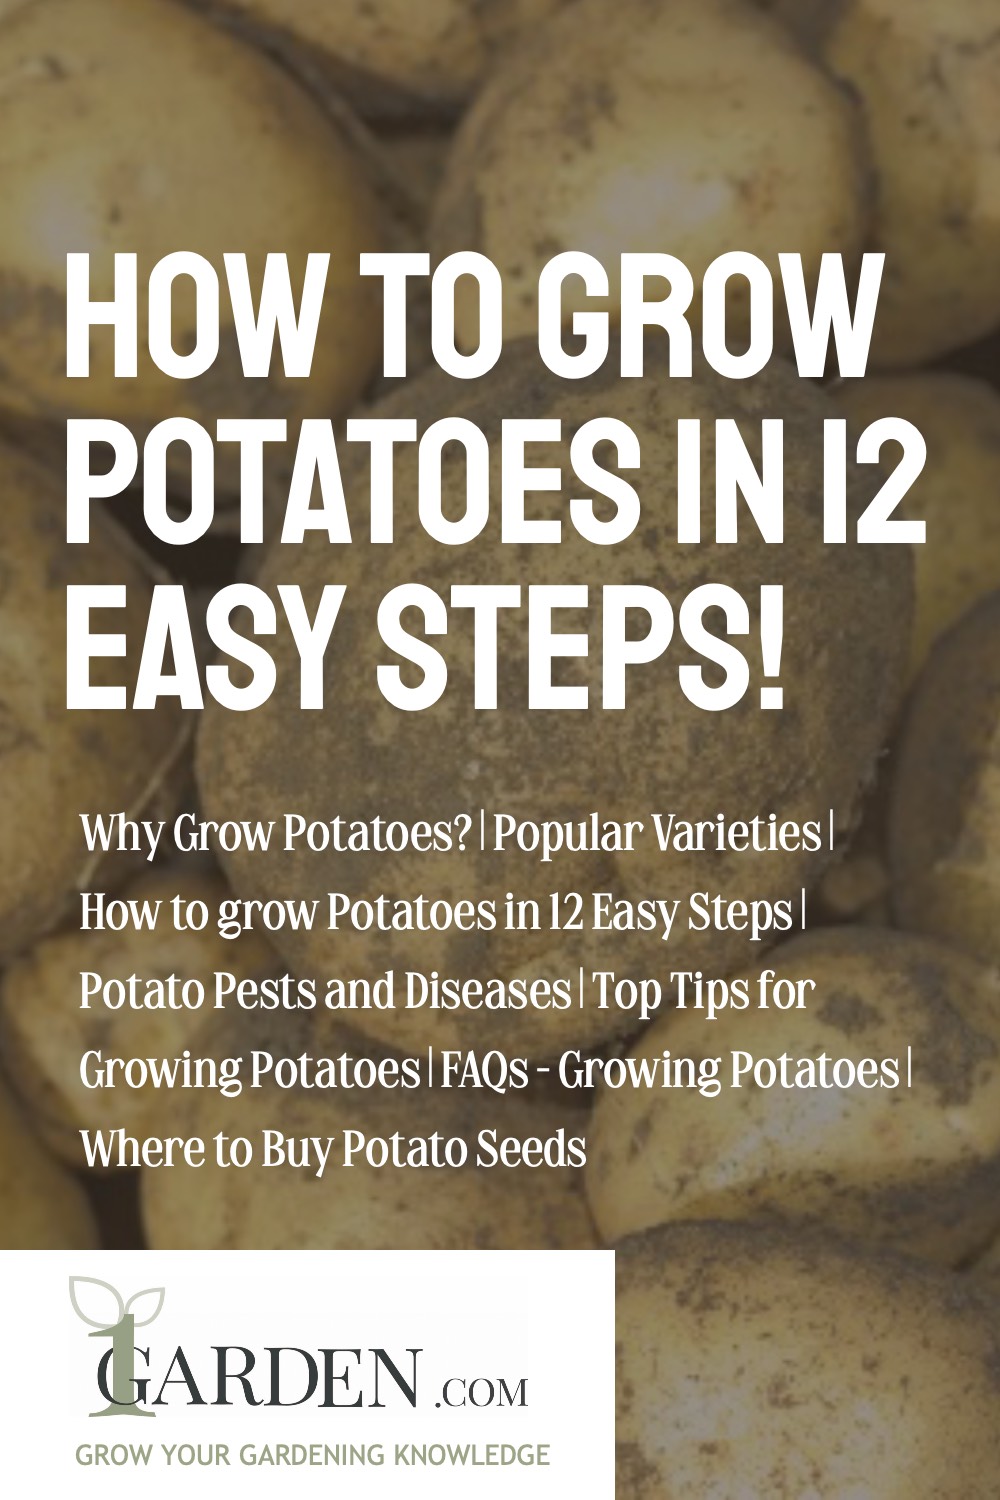 How to Grow Potatoes in 12 Easy Steps - Guides and Tips_Pinterest_1000x1500.jpg